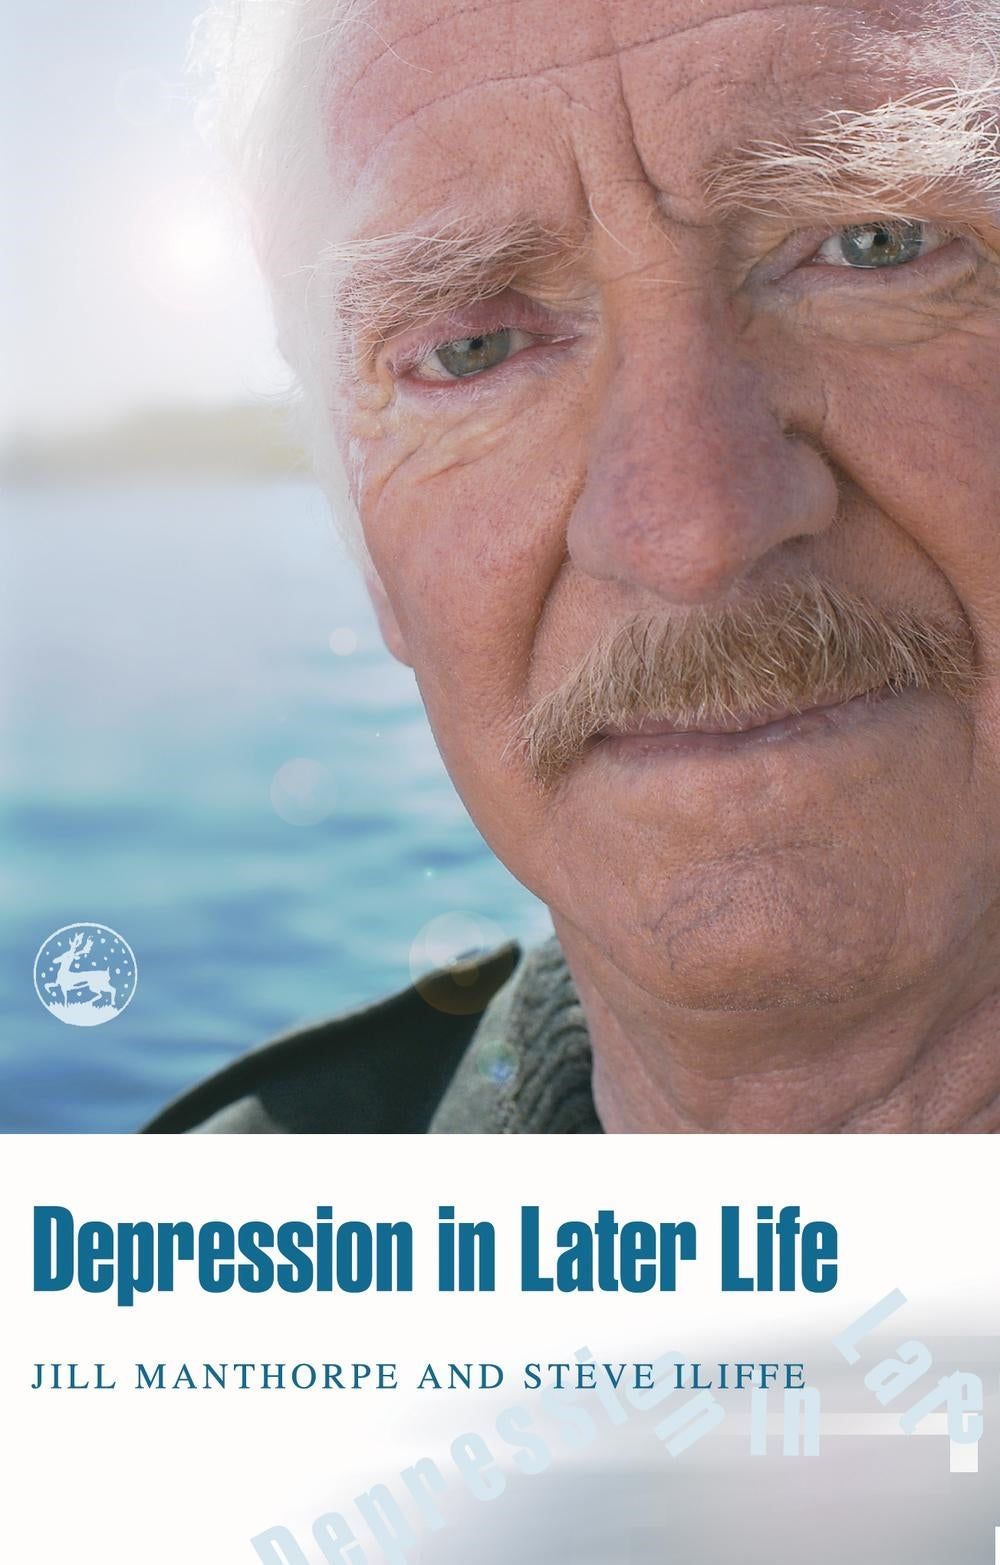 Depression in Later Life by Steve Iliffe, Jill Manthorpe